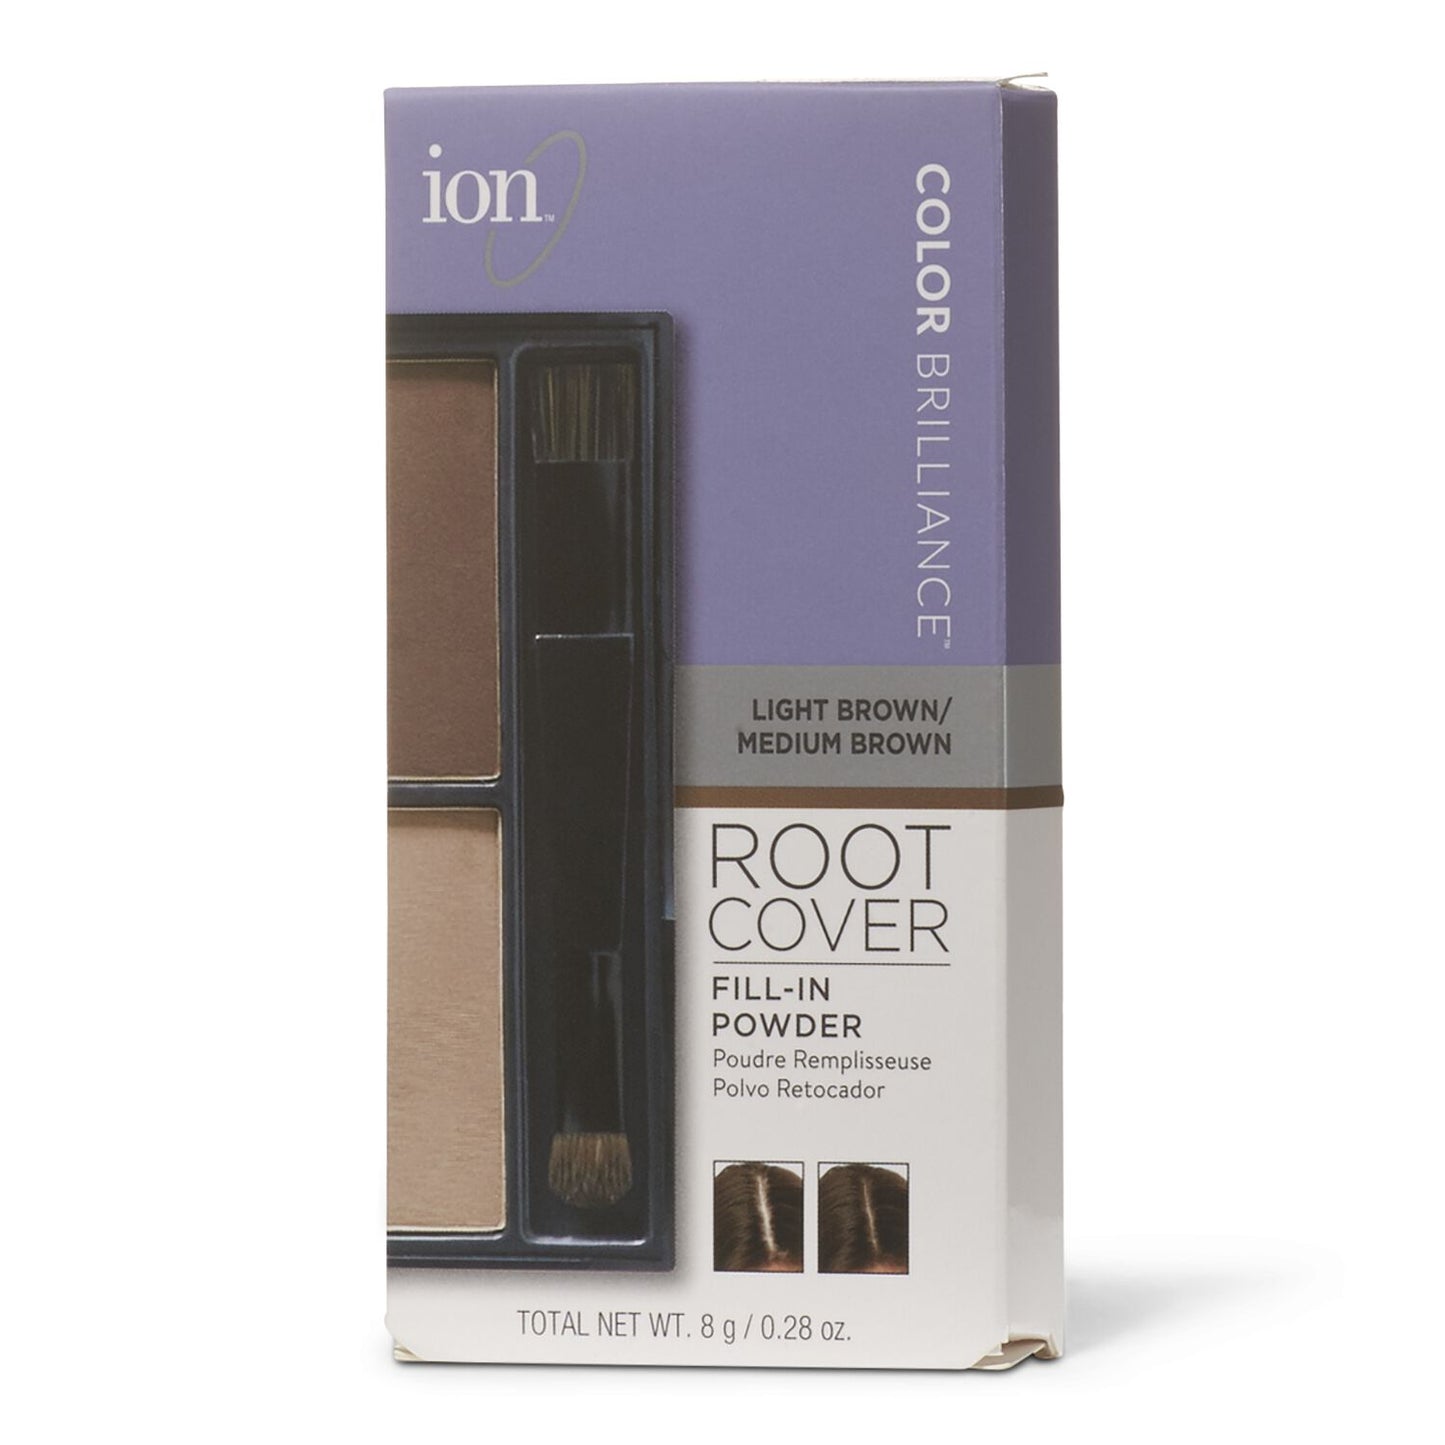 Color Brilliance  by   ion Light/Medium Brown Root Cover Fill-in Powder